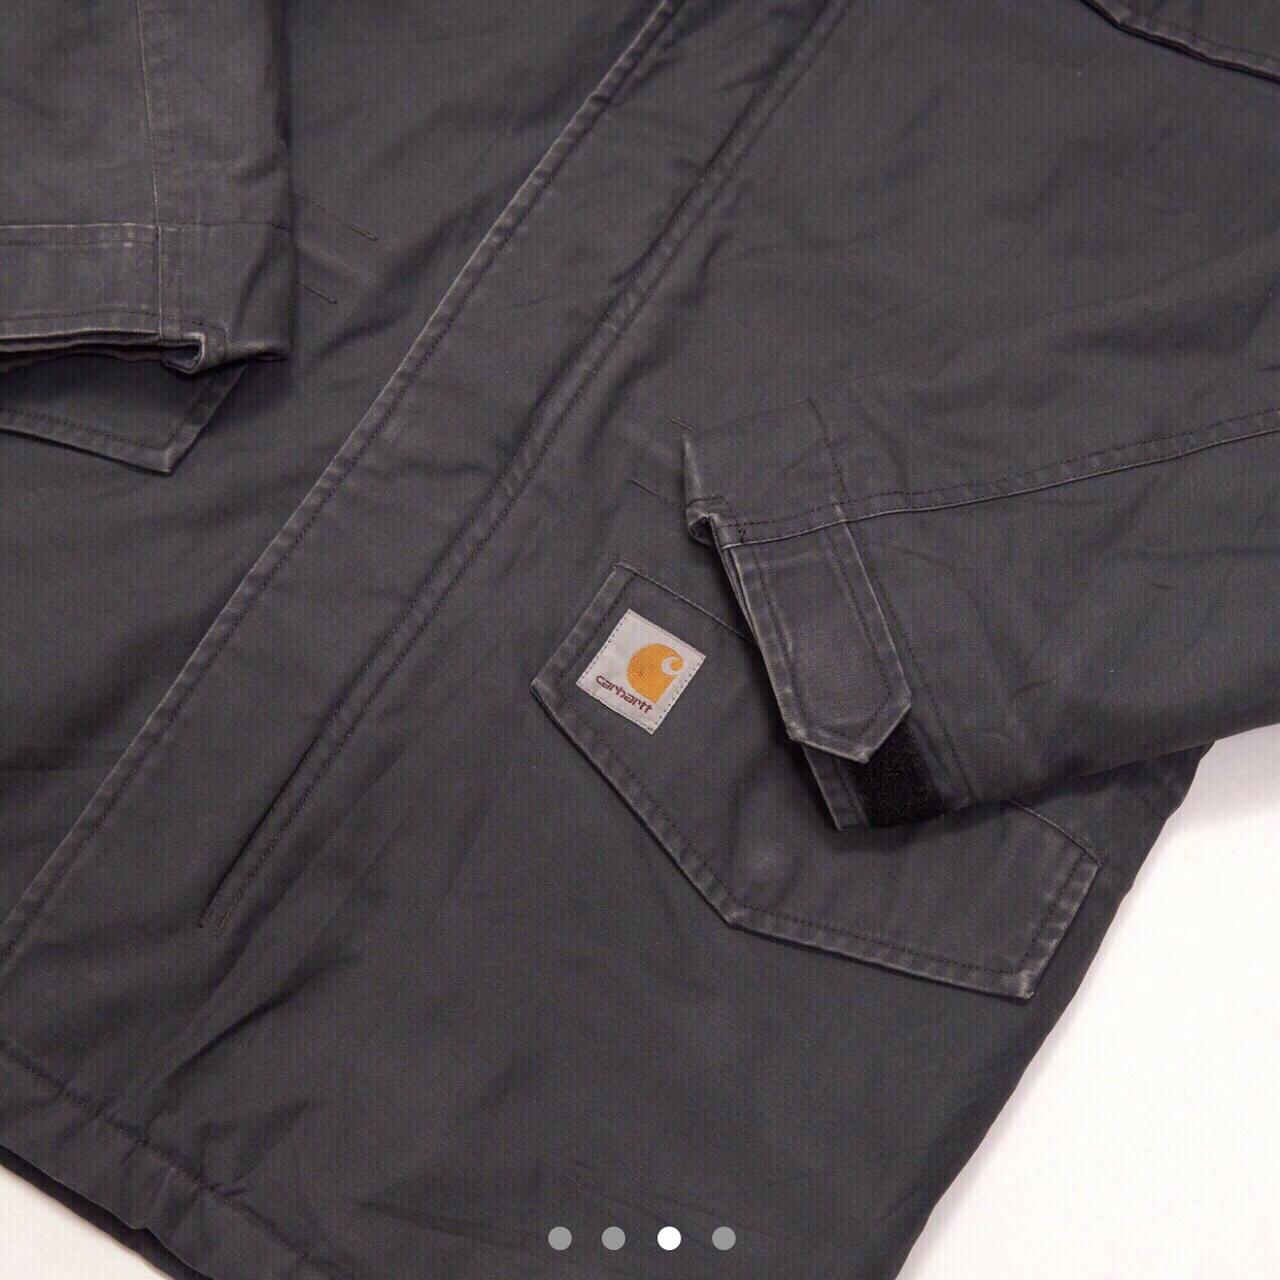 Carhartt wip Coat Removable Hood Quilt lined Size M... - Depop